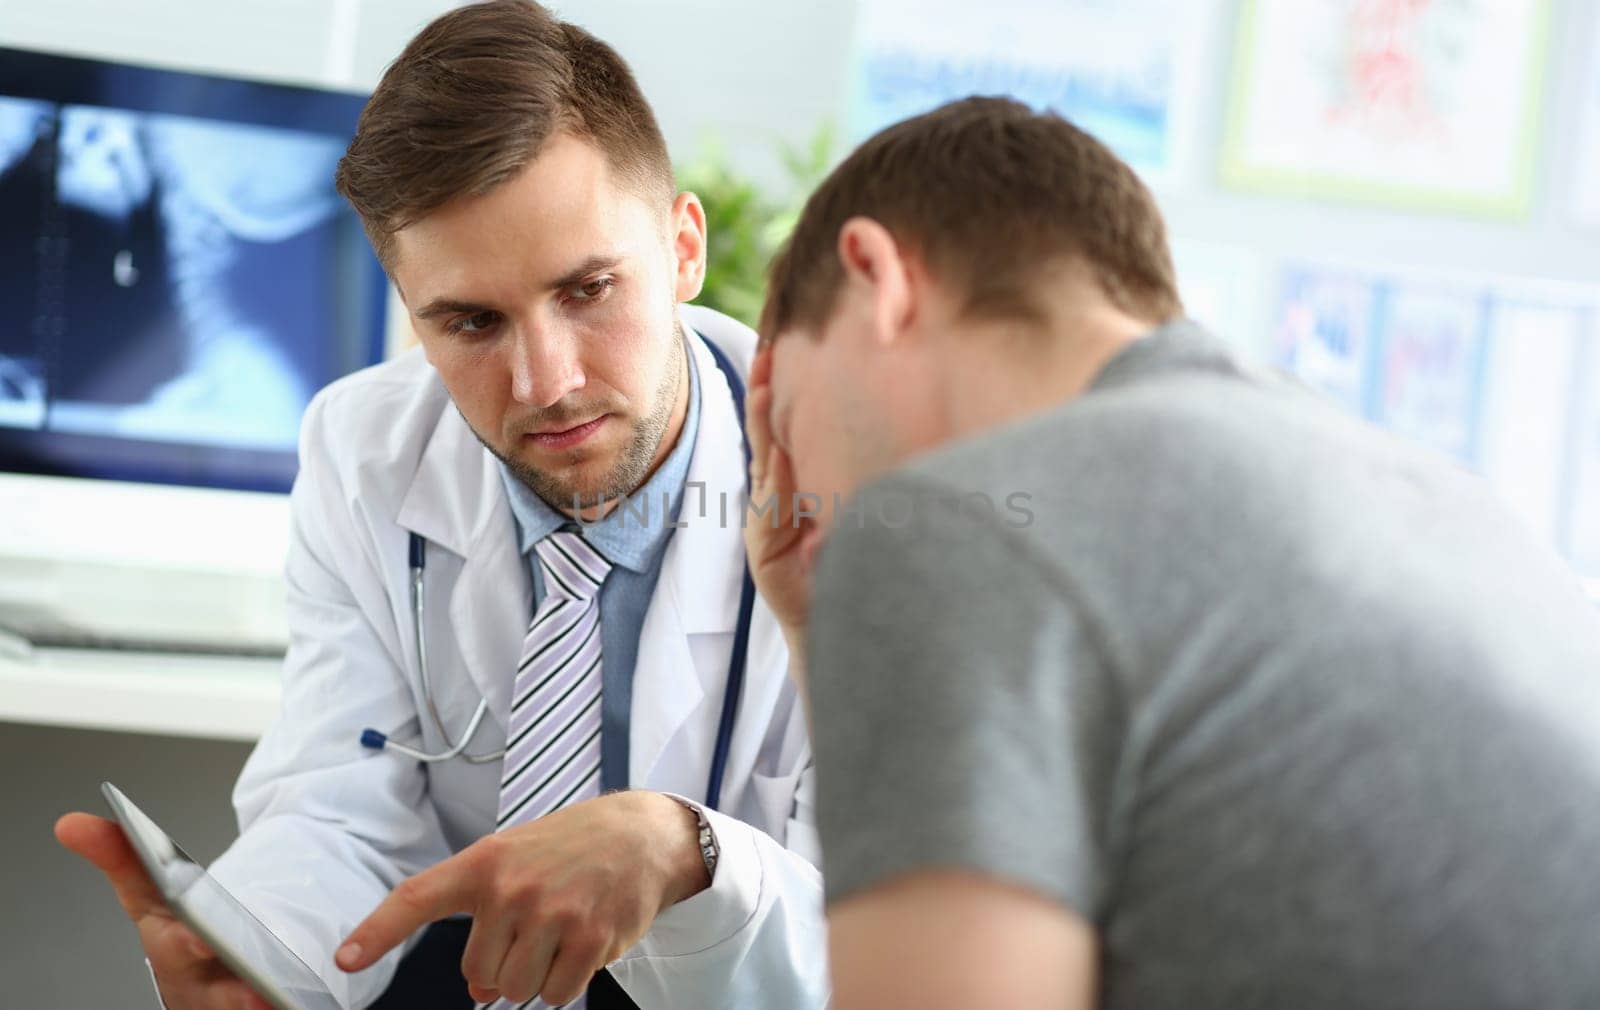 Portrait of doctor talking with patient. Physician pointing to something on tablet and seriously looking at sad visitor. Upset male sitting with head down. Medicine concept. Blurred background